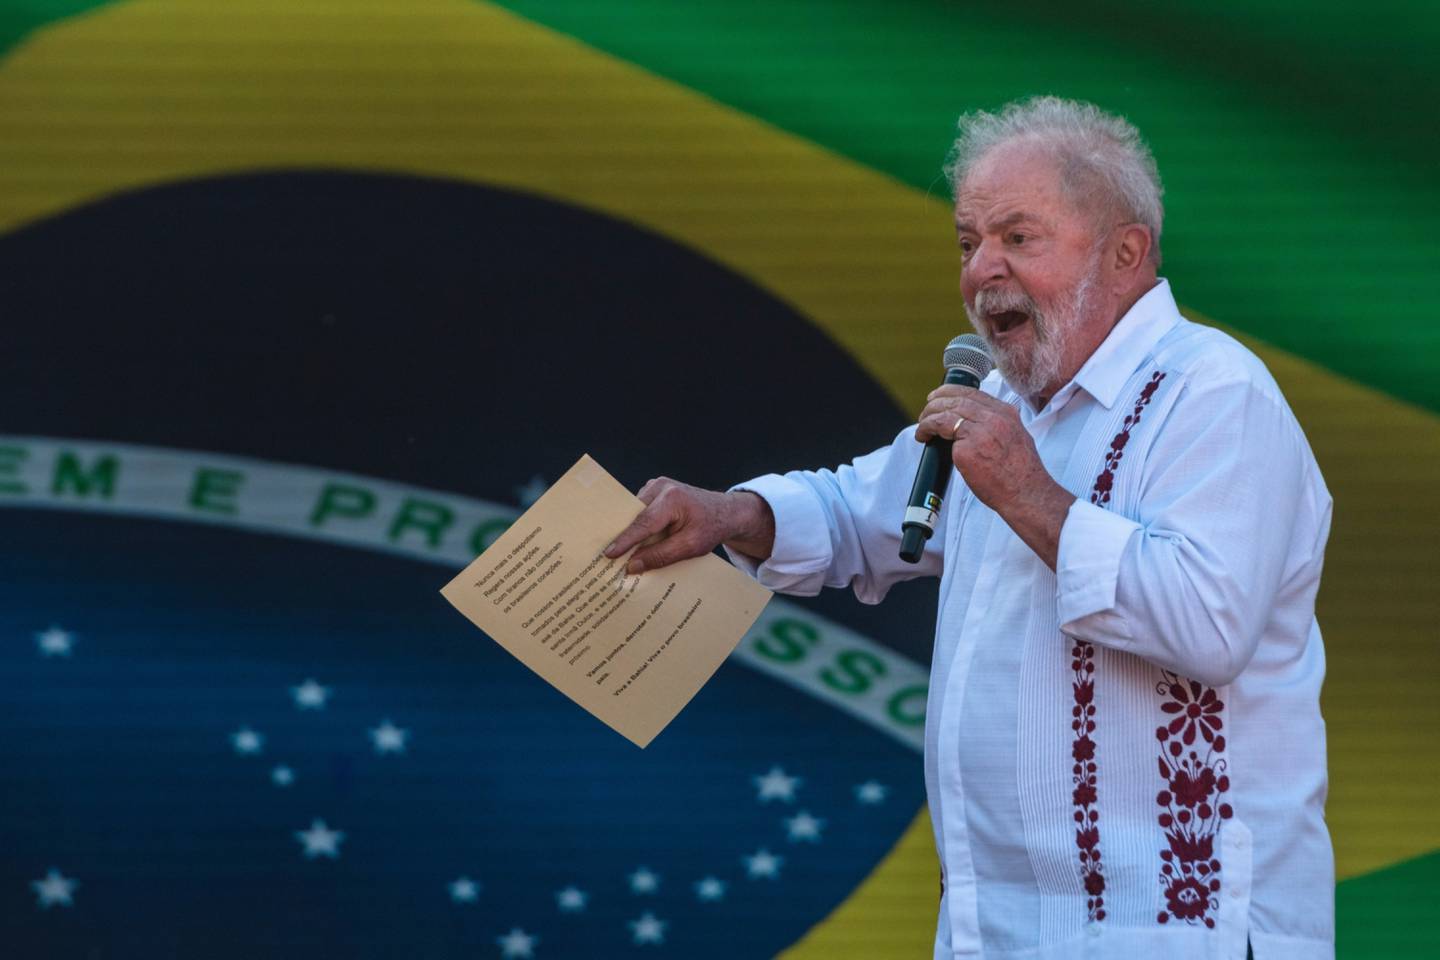 Luiz Inacio Lula da Silva, former president of Brazil, speaks at a rally during Bahia's Independence Day in Salvador, Bahia state. Leftist former president Lula continues to lead in the polls against incumbent Jair Bolsonaro. Photographer: Maira Erlich/Bloomberg
dfd